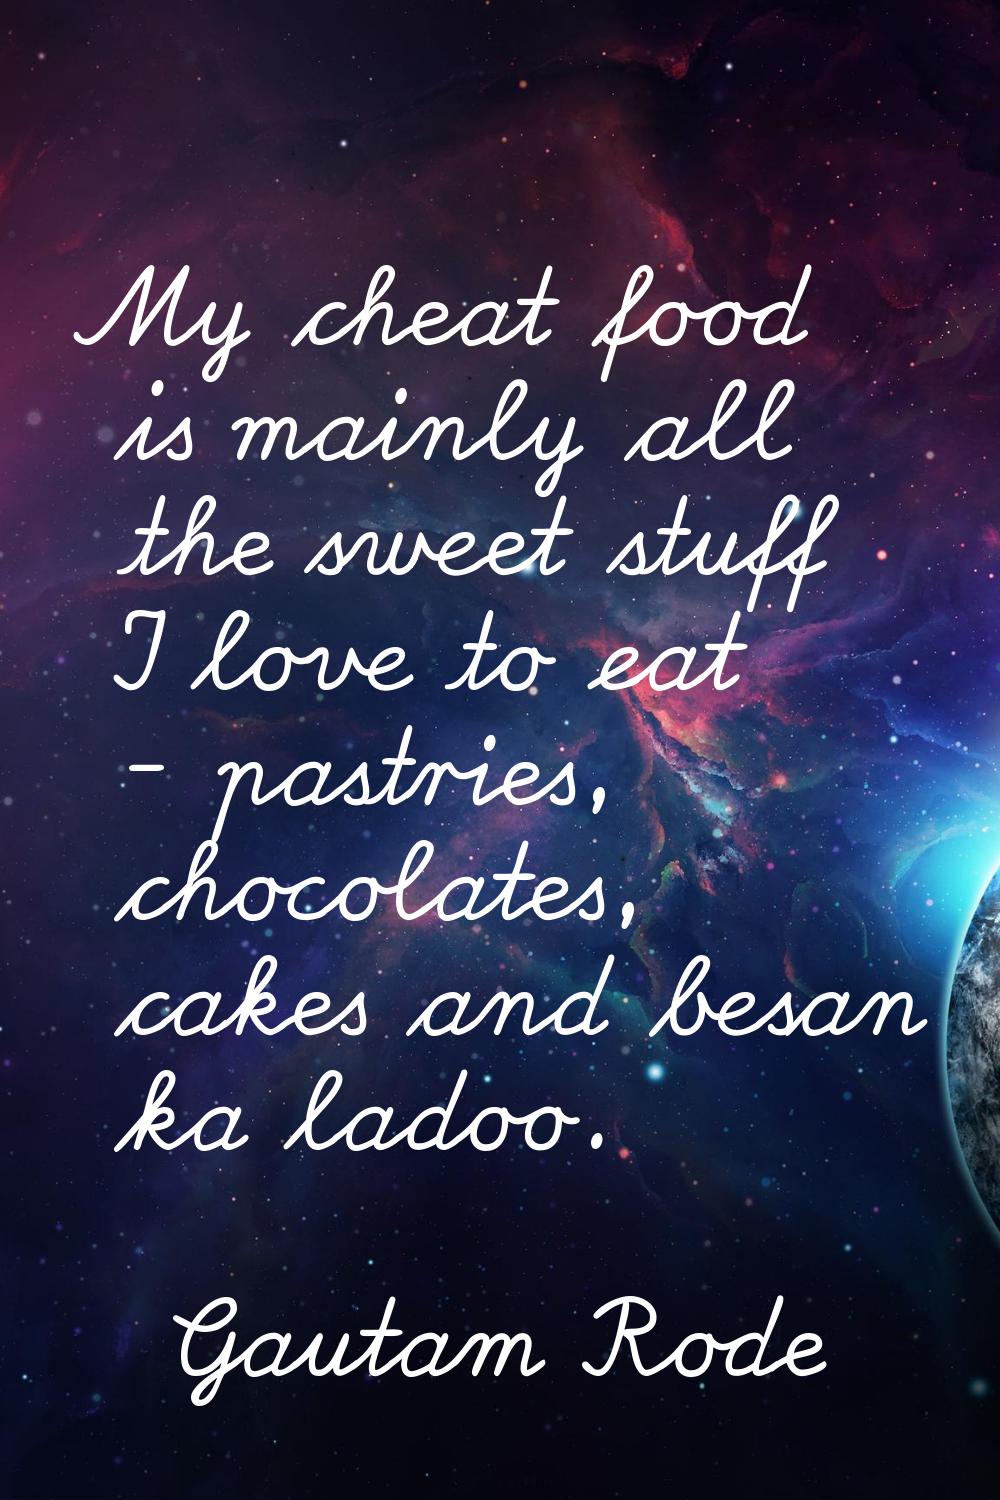 My cheat food is mainly all the sweet stuff I love to eat - pastries, chocolates, cakes and besan k